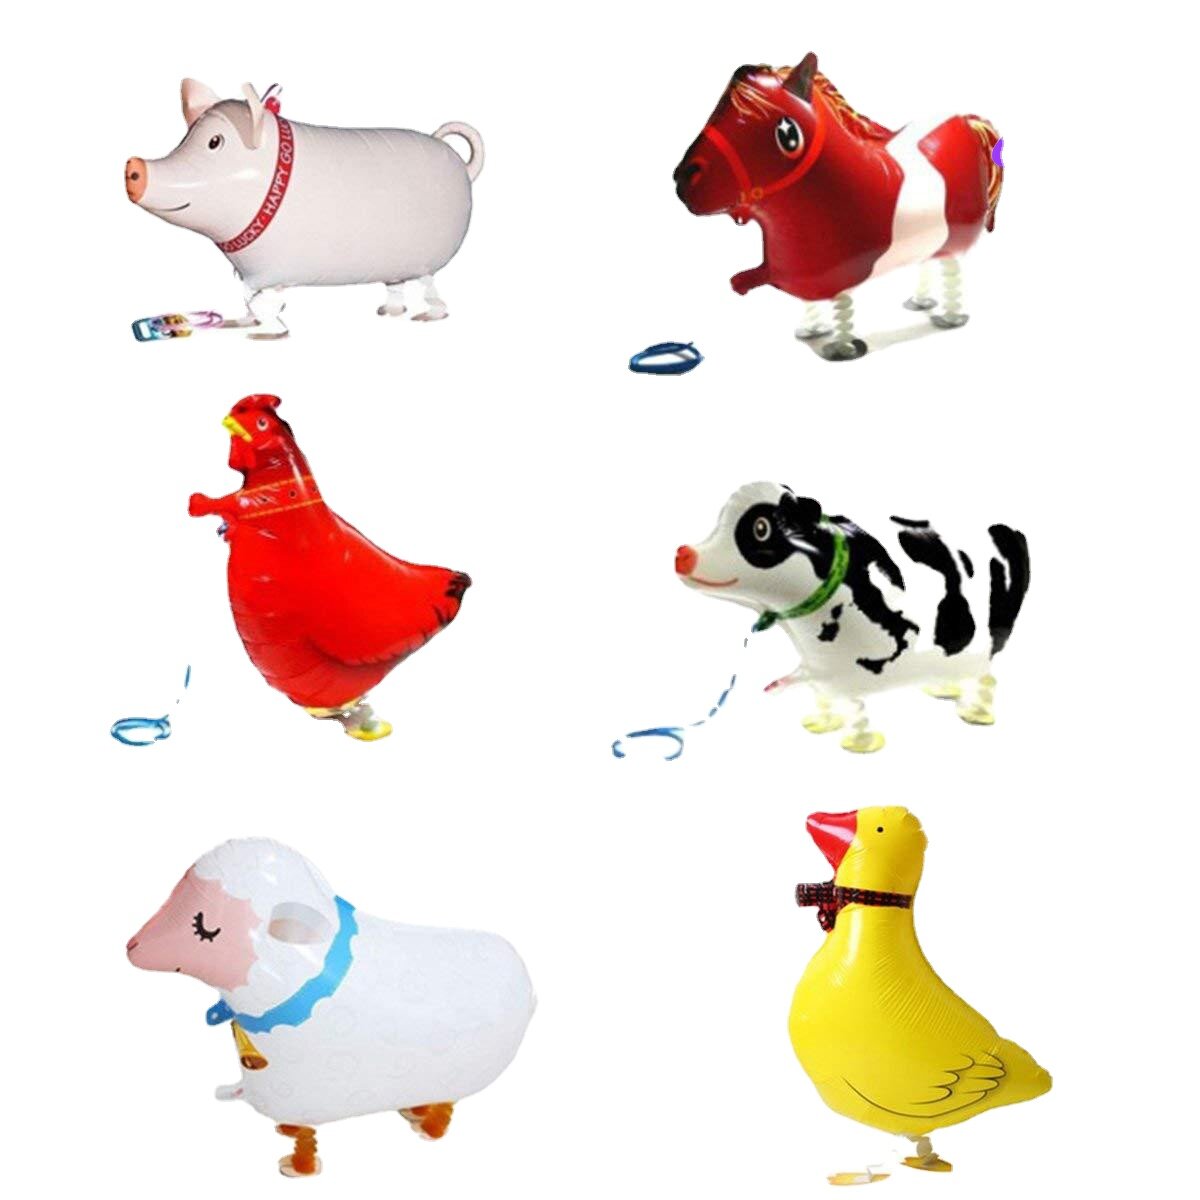 6PCS Animal Balloons Farm Animal Balloon for Birthday Party or Other Parties DLOnline Big Size 